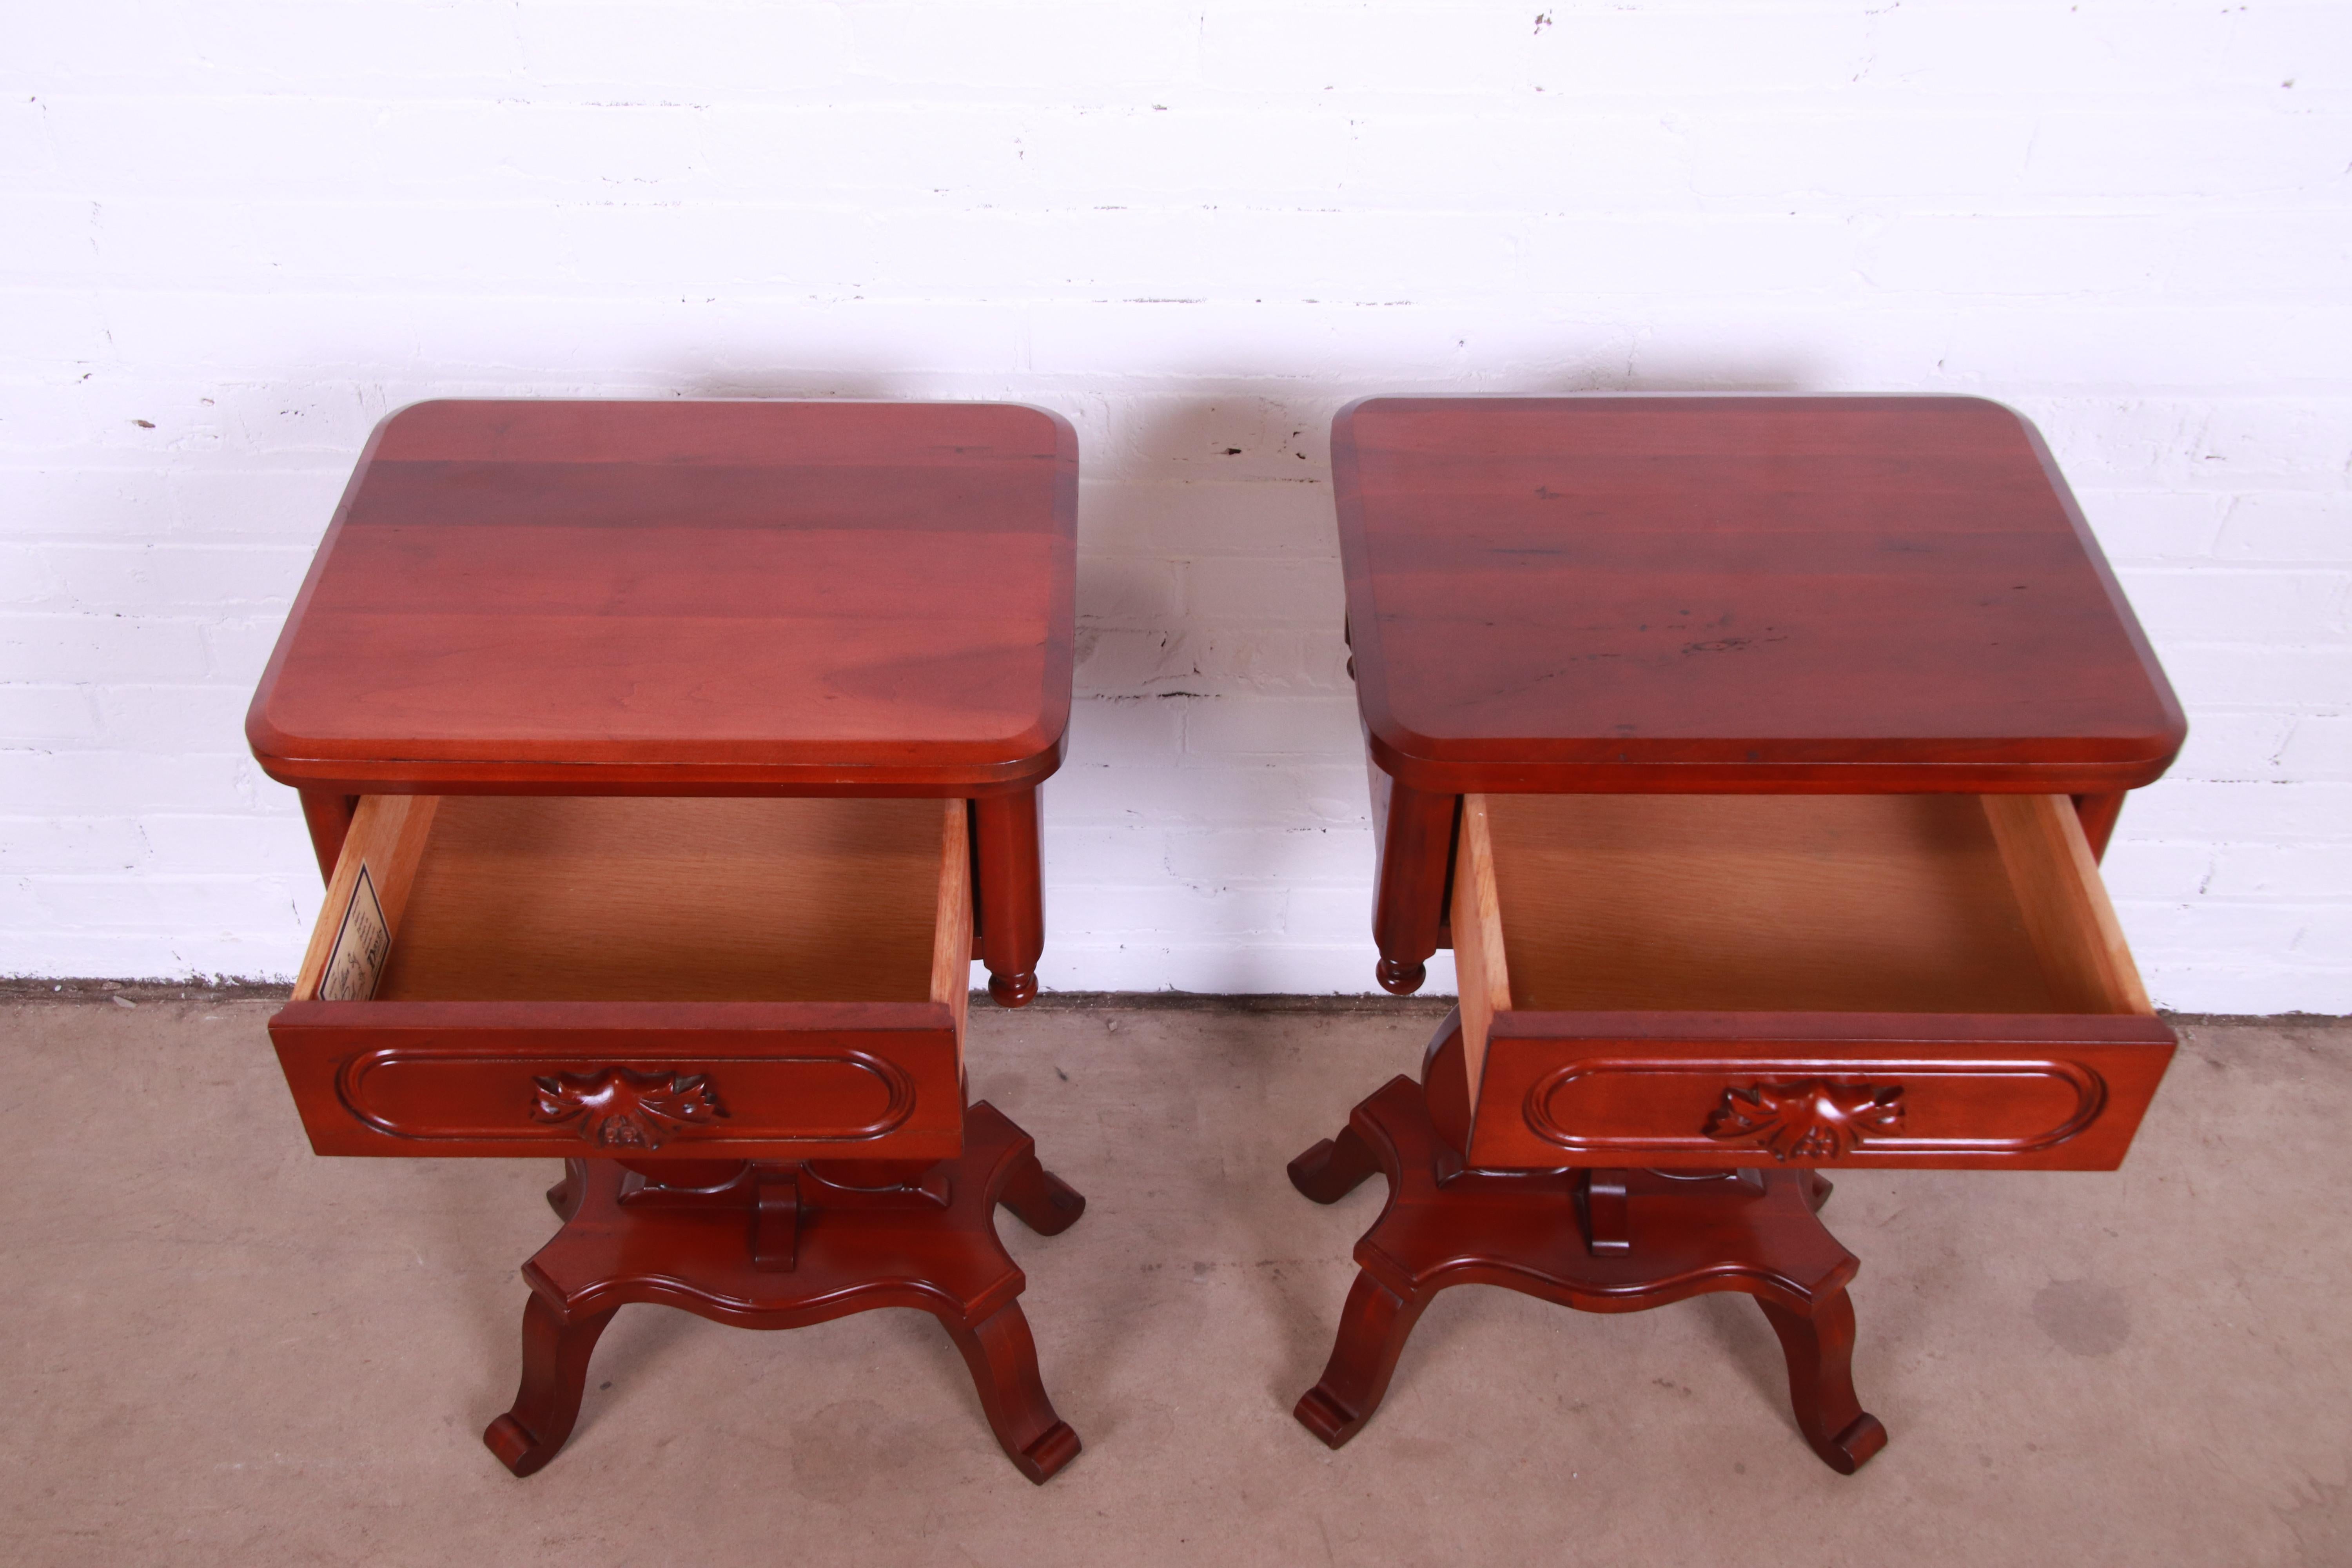 Lillian Russell Collection Victorian Cherry Nightstands by Davis Cabinet Co. 1